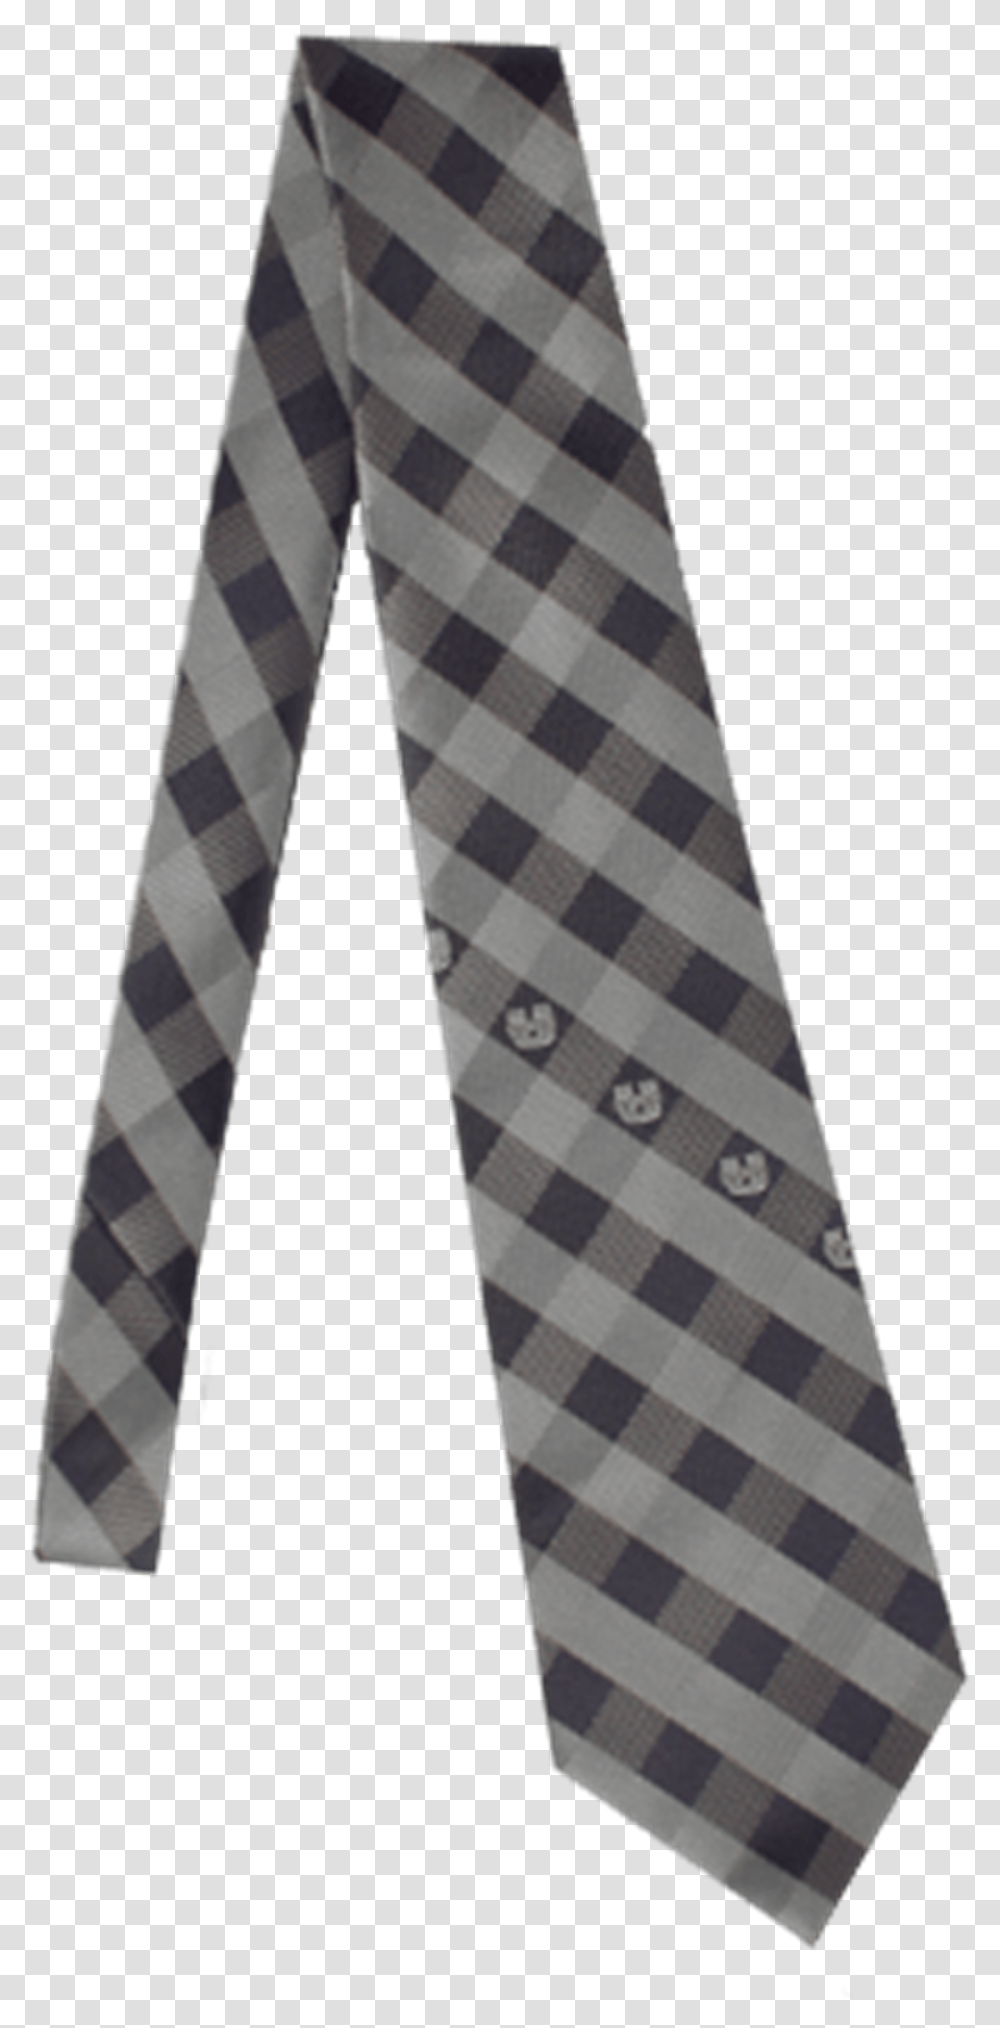 U State Checkered Tie Gray Amp Navy Plaid, Accessories, Accessory, Necktie, Bow Tie Transparent Png